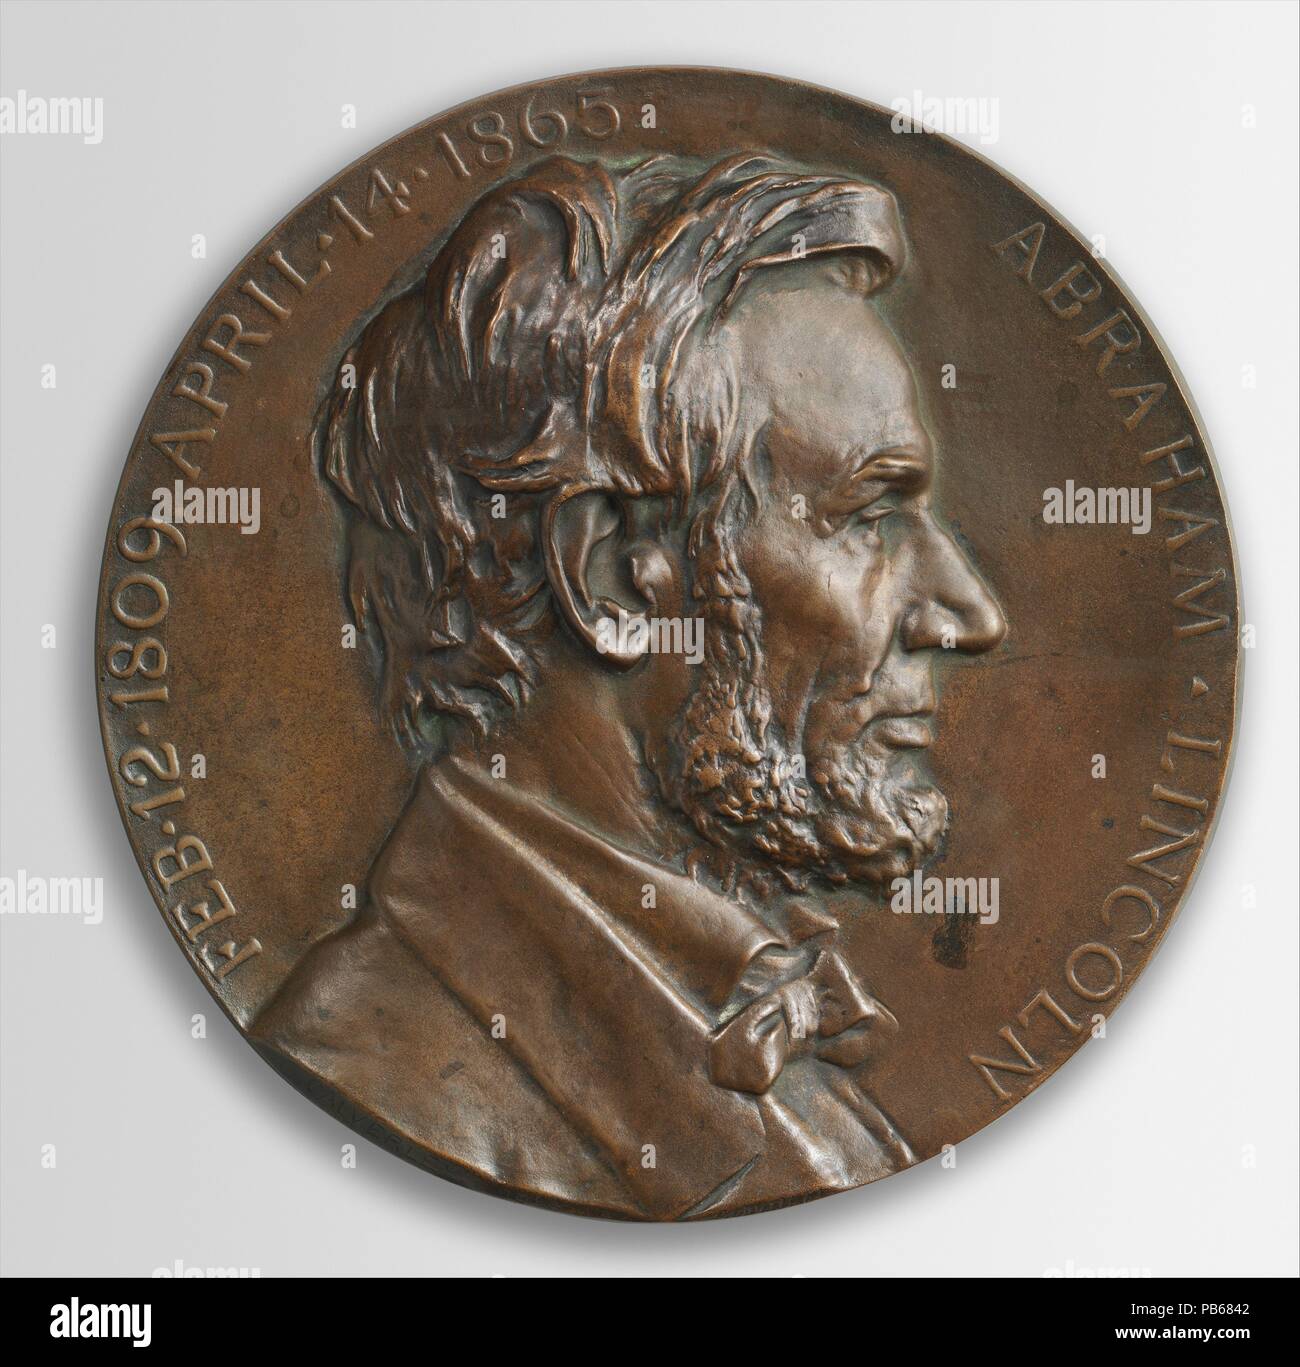 Abraham Lincoln. Artist: Charles Calverley (American, Albany, New York 1833-1914 Essex Fells, New Jersey). Dimensions: Diameter: 10 in. (25.4 cm). Date: 1898.  Calverley, known for his incisive portrait medallions of prominent Americans, cast this bust-length profile medallion of Lincoln in 1898. Calverley reworked it from an earlier rectangular version of 1868, completed three years after the president's assassination. It was exhibited at the Union League Club of New York in 1869 (private collection). Museum: Metropolitan Museum of Art, New York, USA. Stock Photo